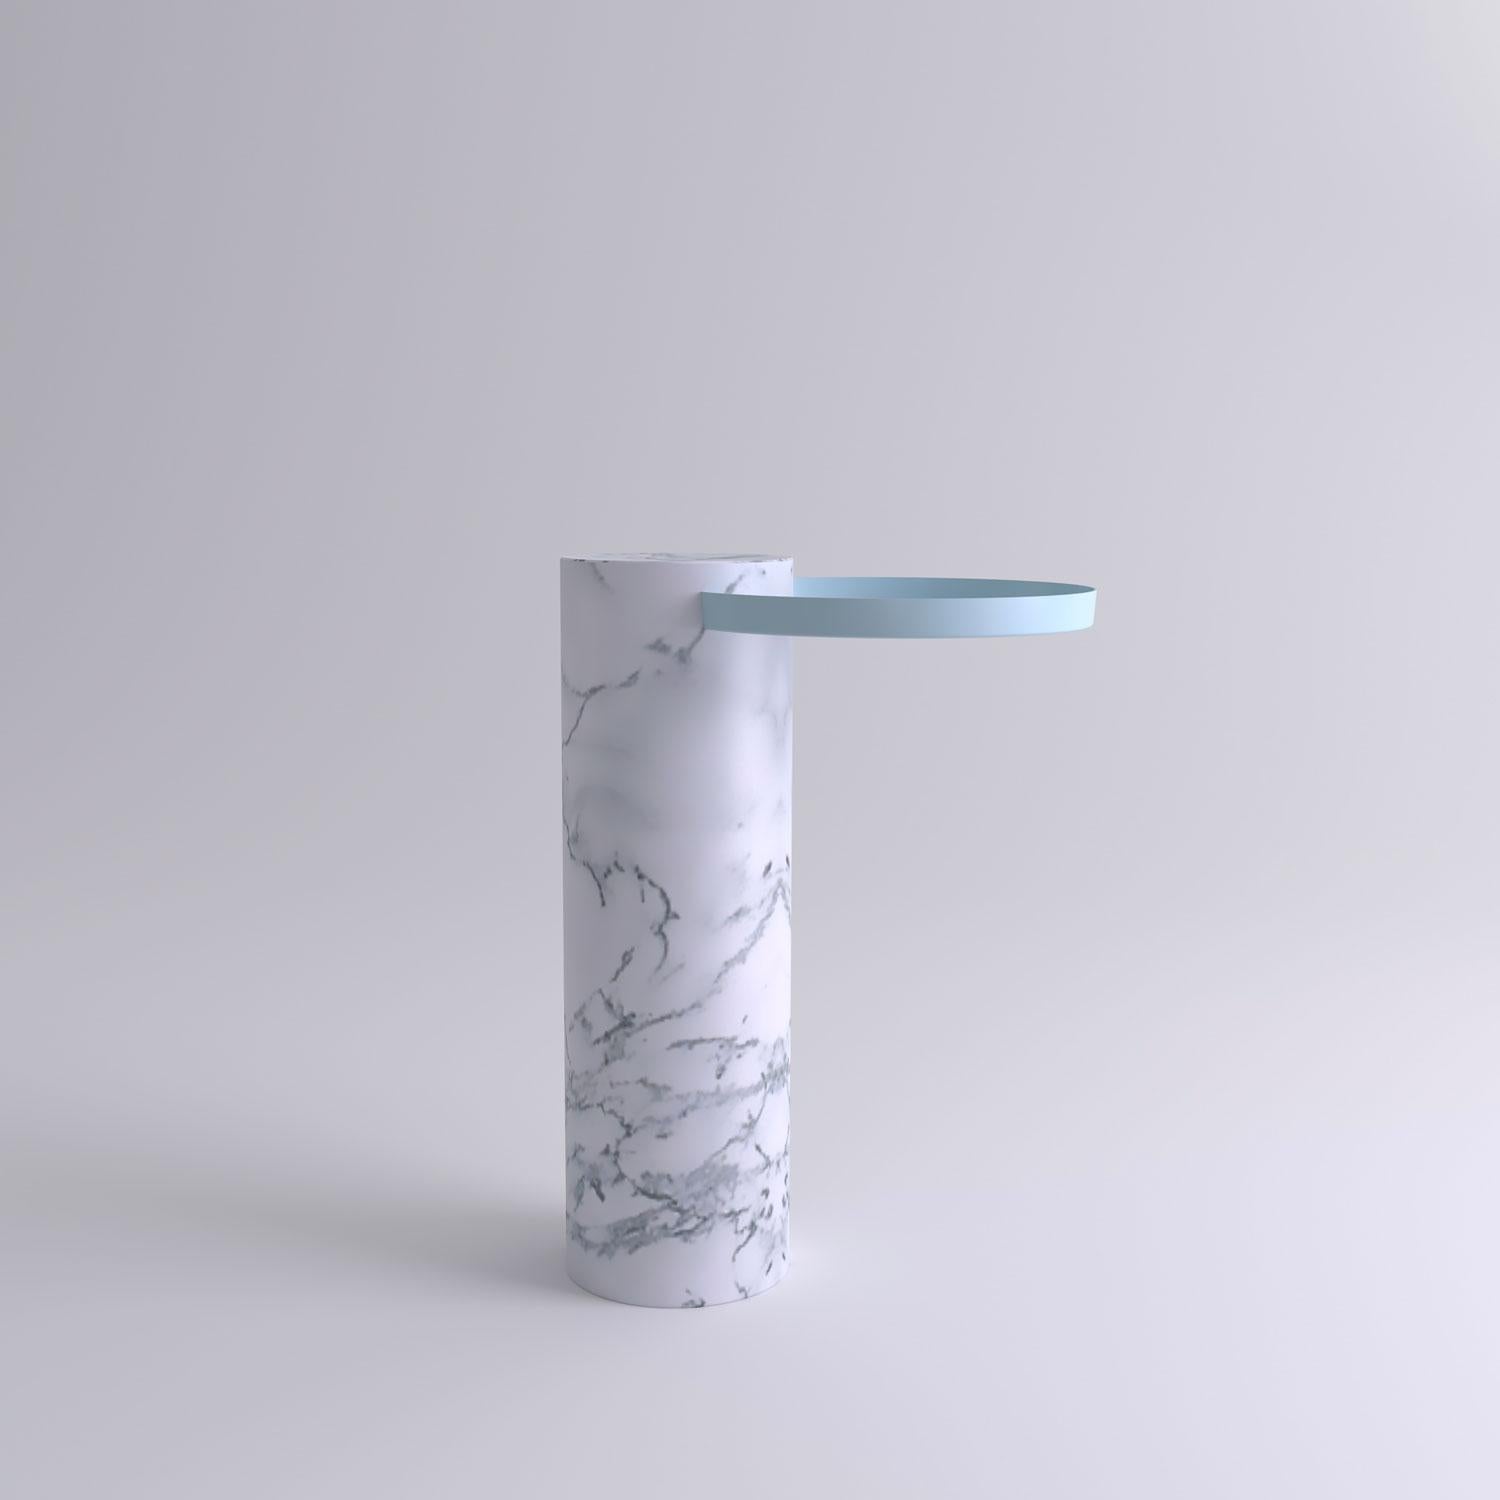 High white marble contemporary guéridon, Sebastian Herkner
Dimensions: D 42 x H 57 cm
Materials: Pele de Tigre marble, light blue metal tray

The salute table exists in 3 sizes, 4 different marble stones for the column and 5 different finishes